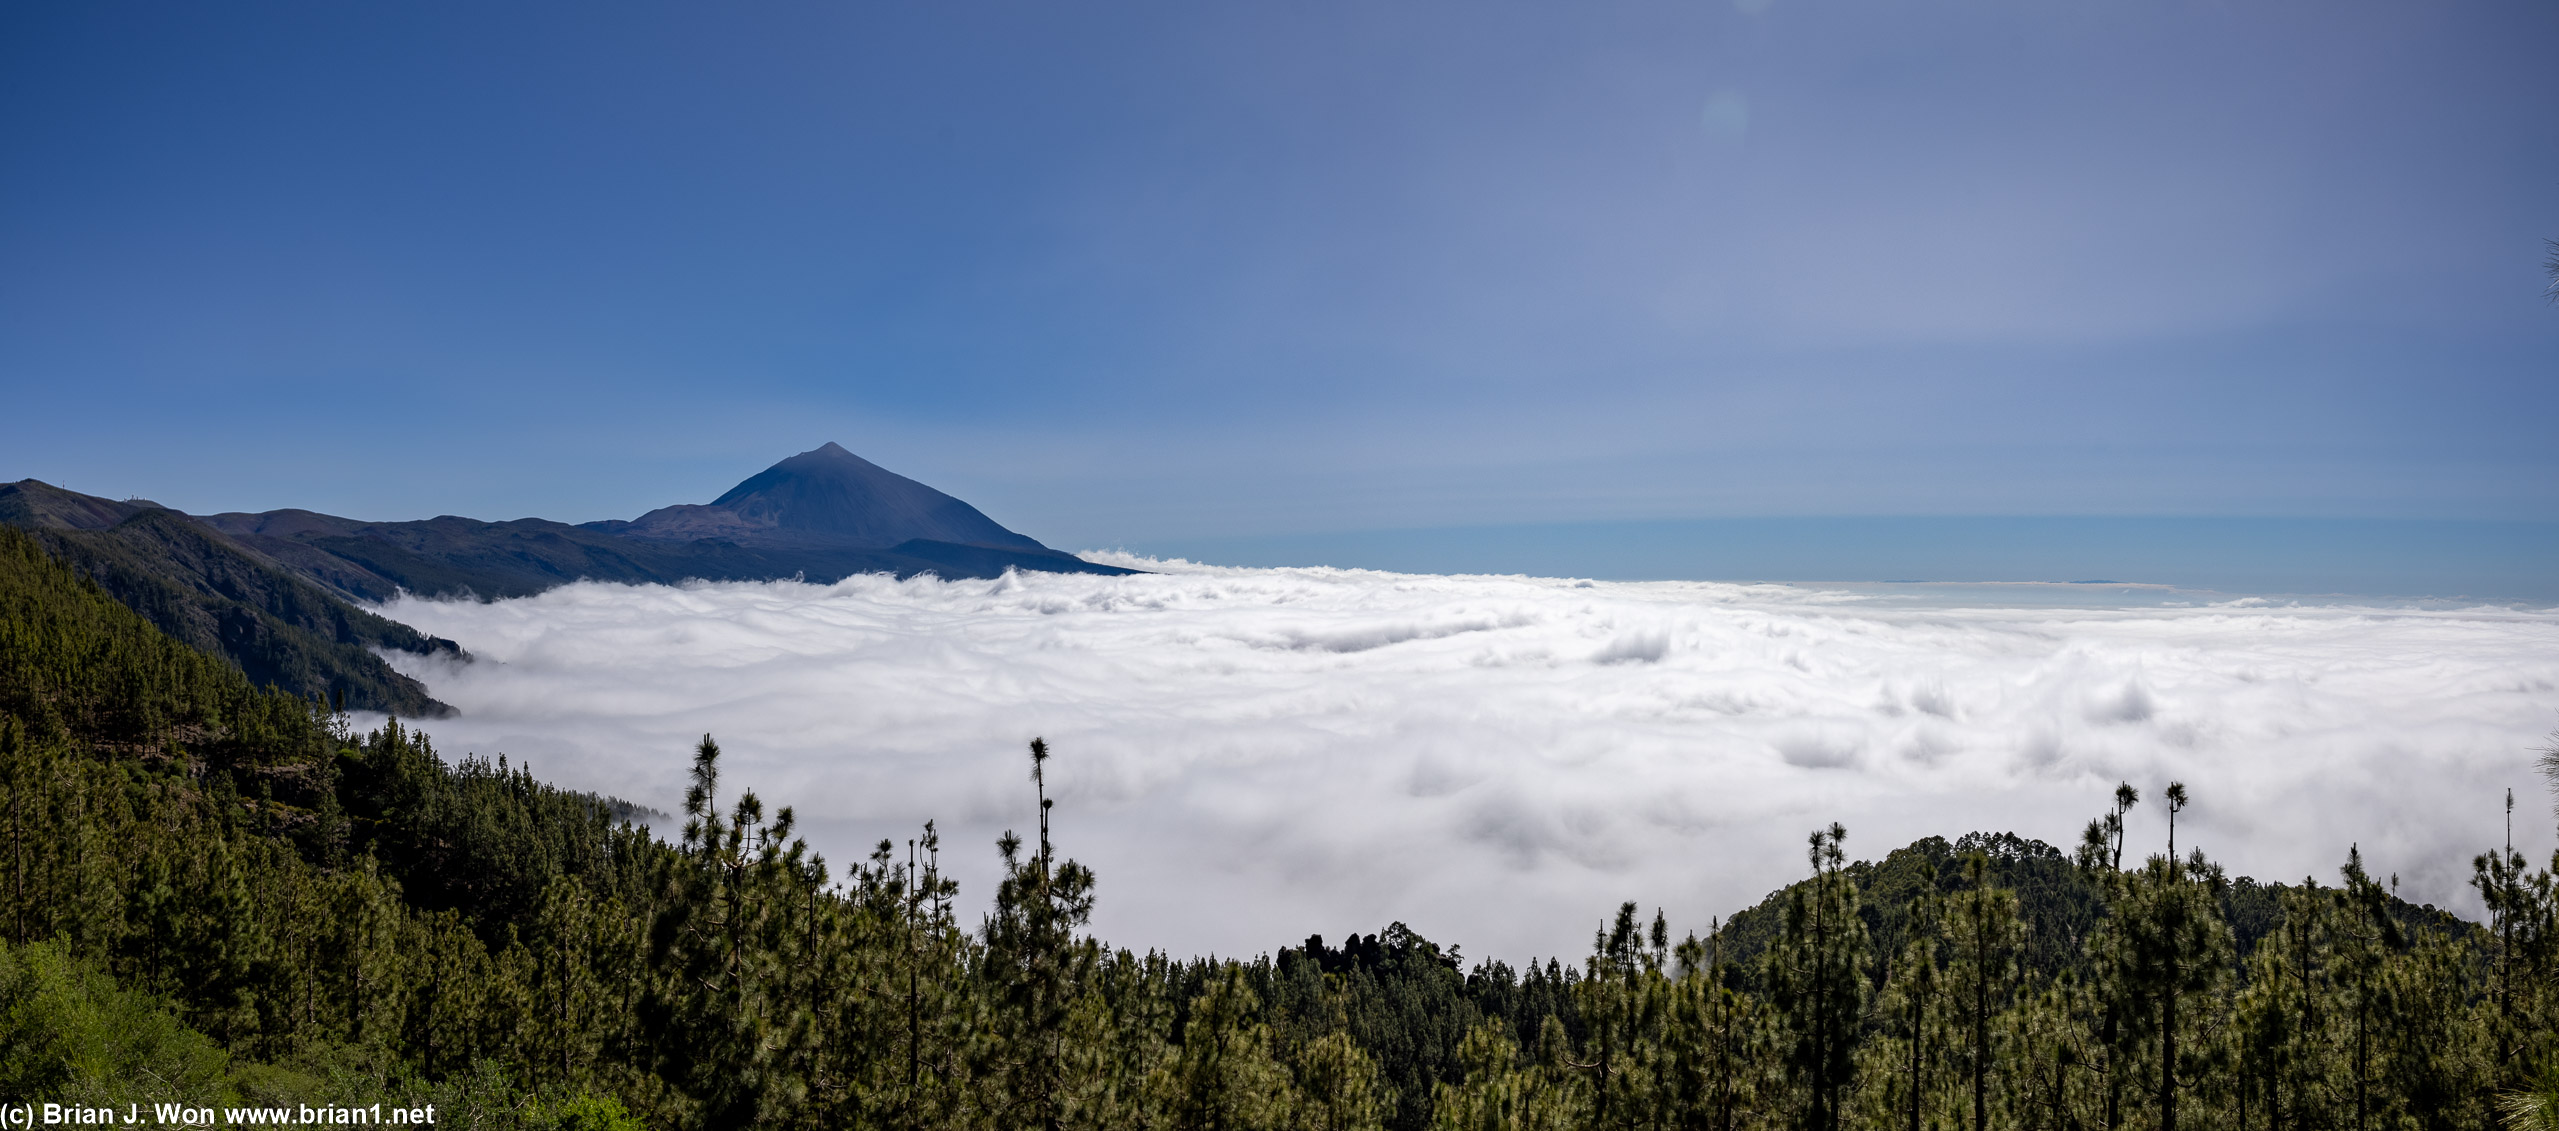 Mirador de Chipeque, perhaps the best known view above the clouds.